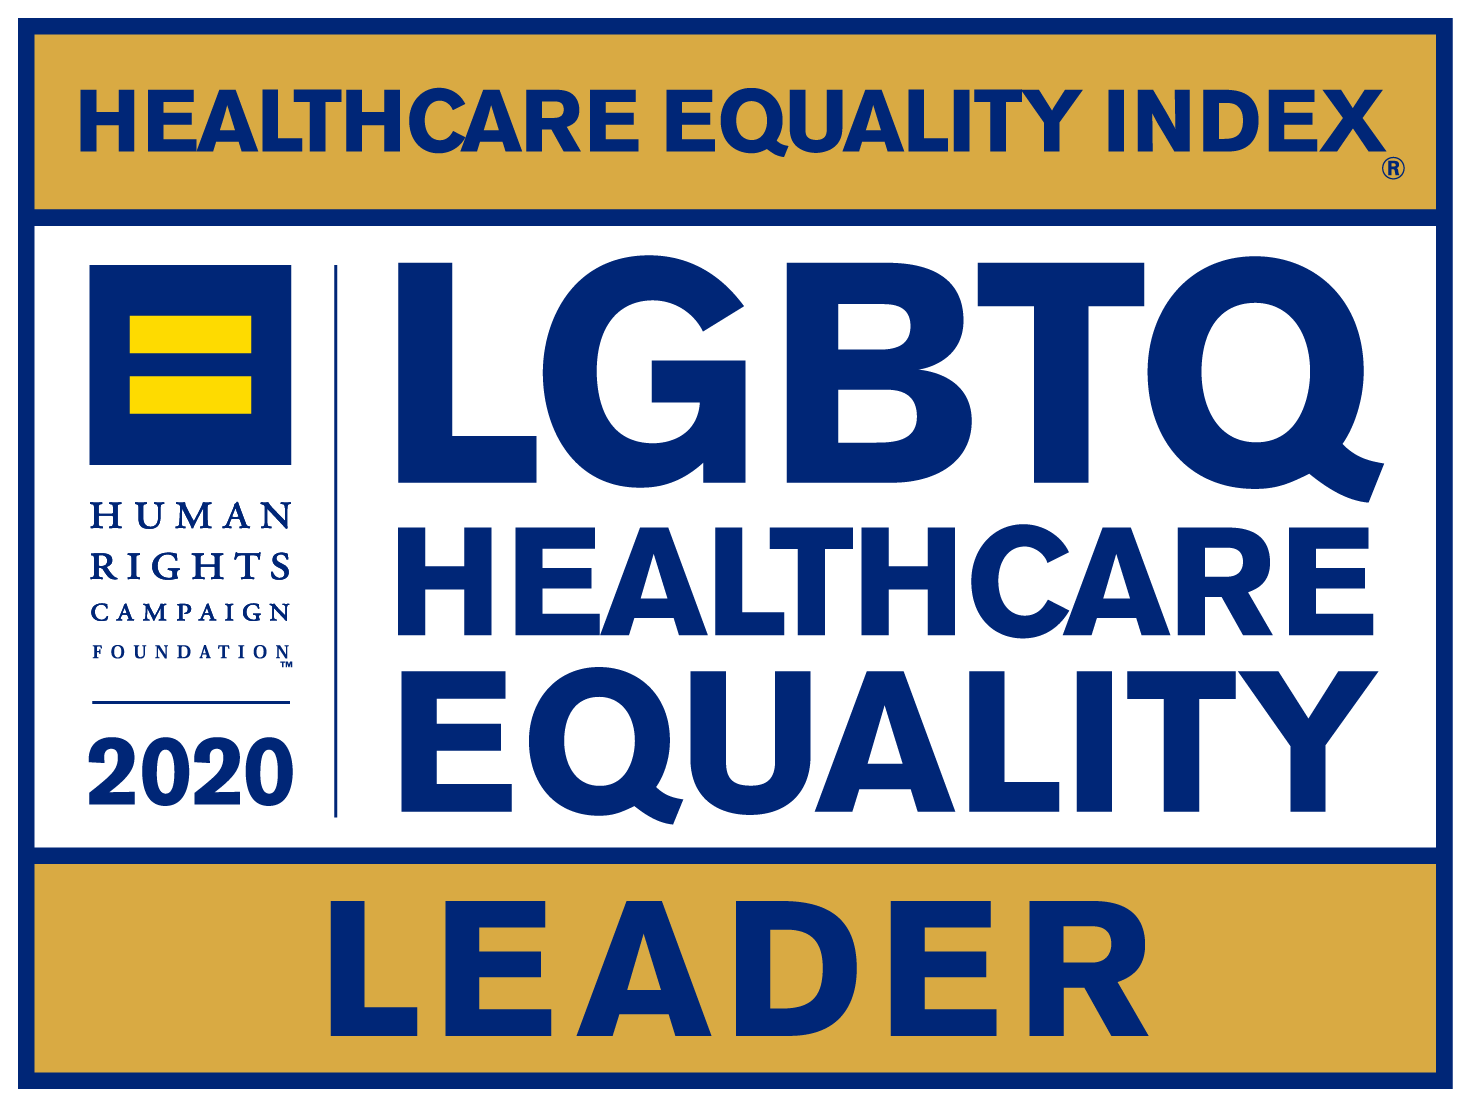 Healthcare Equality Index: LGBTQ Healthcare Quality Leader. Human Rights Campaign Foundation 2020.